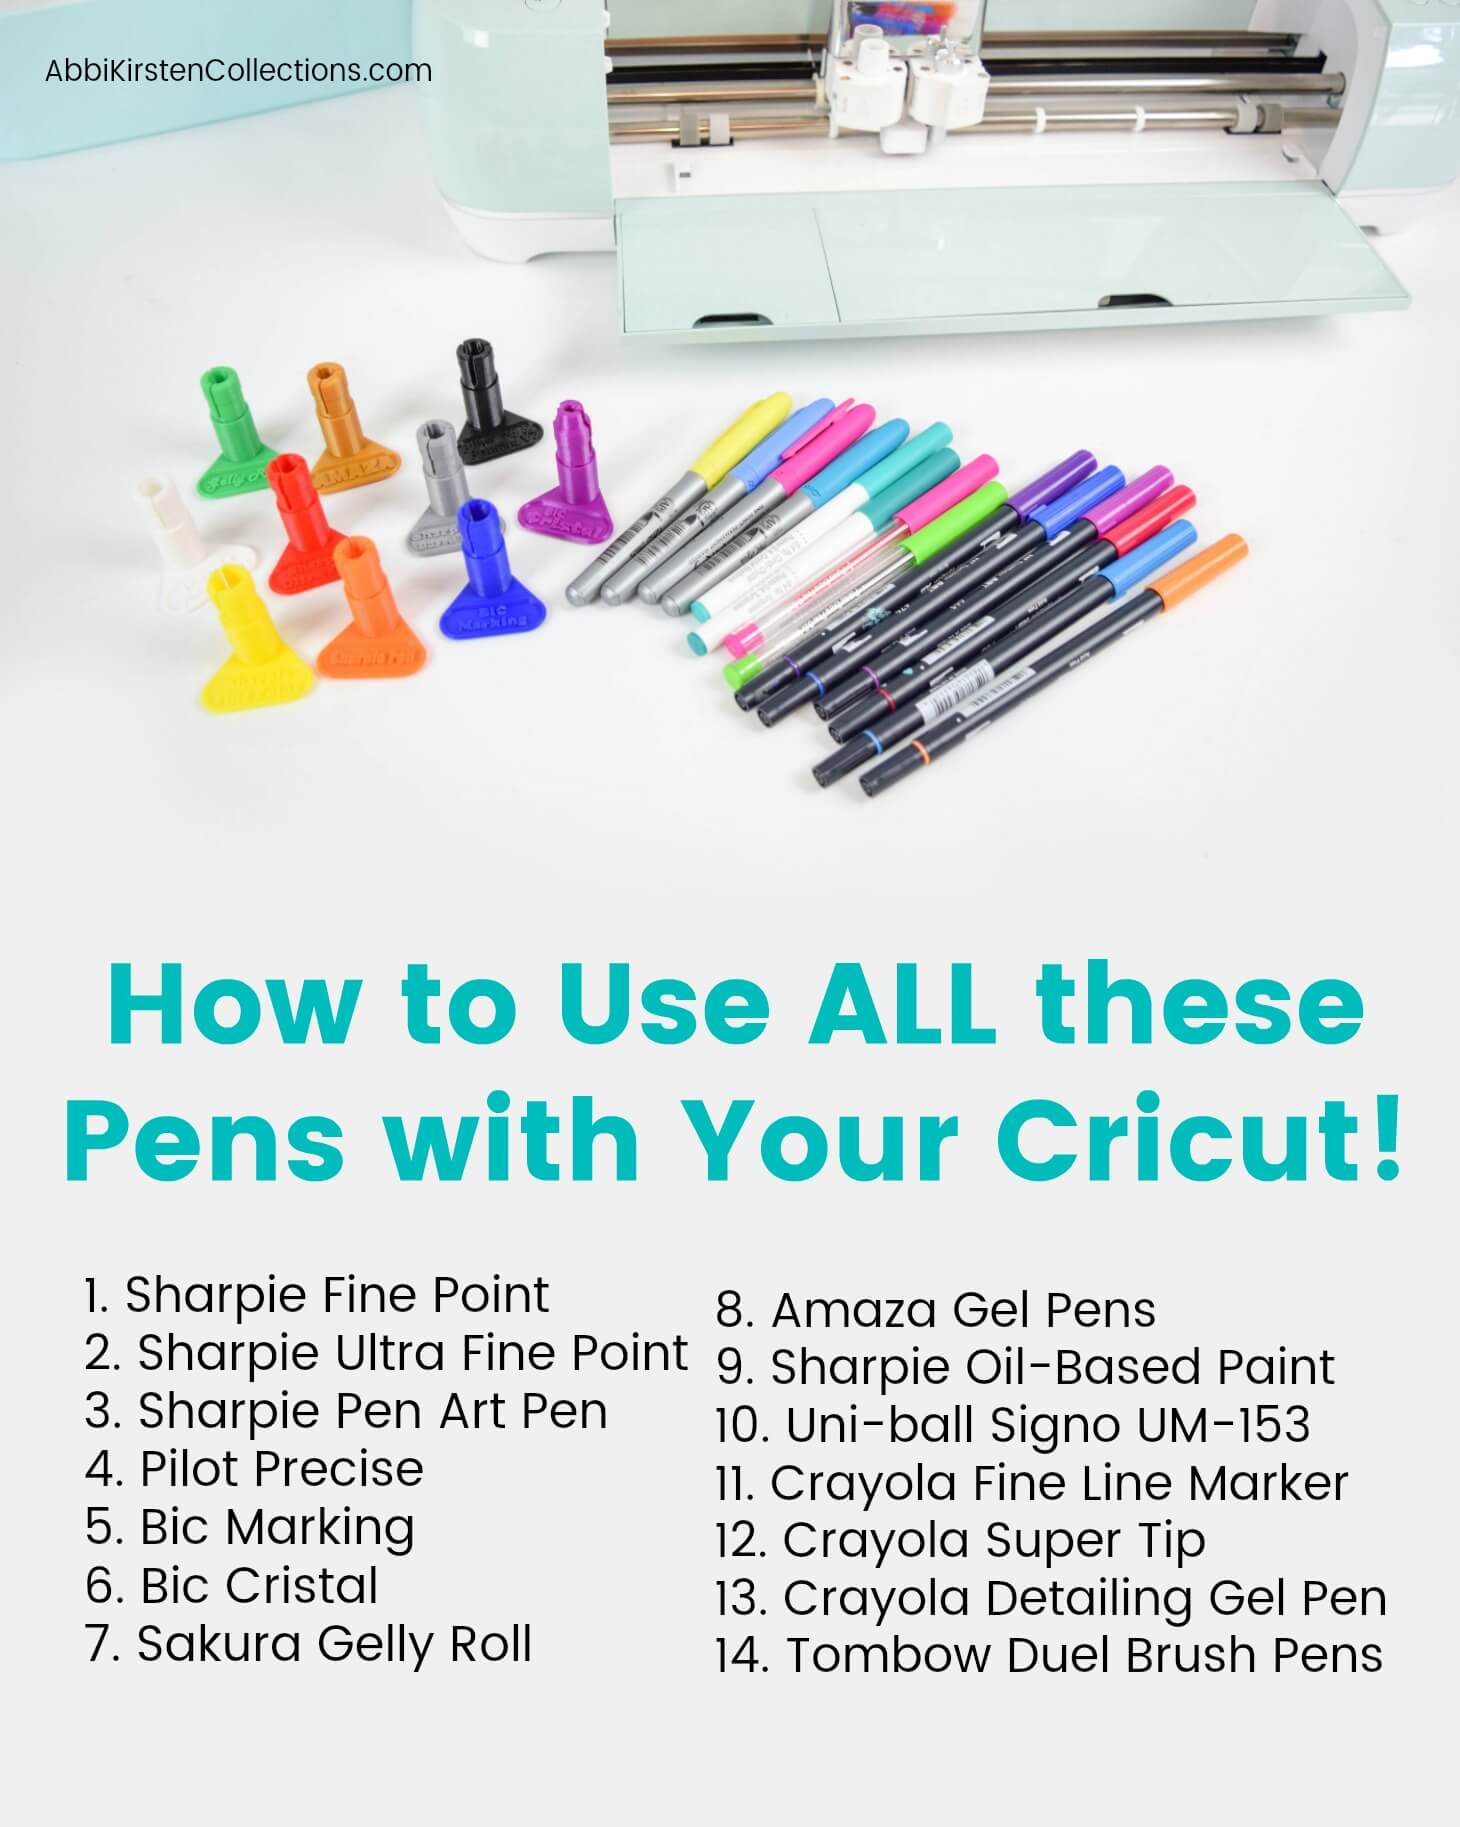 What Pens Work With Cricut? Story - Abbi Kirsten Collections